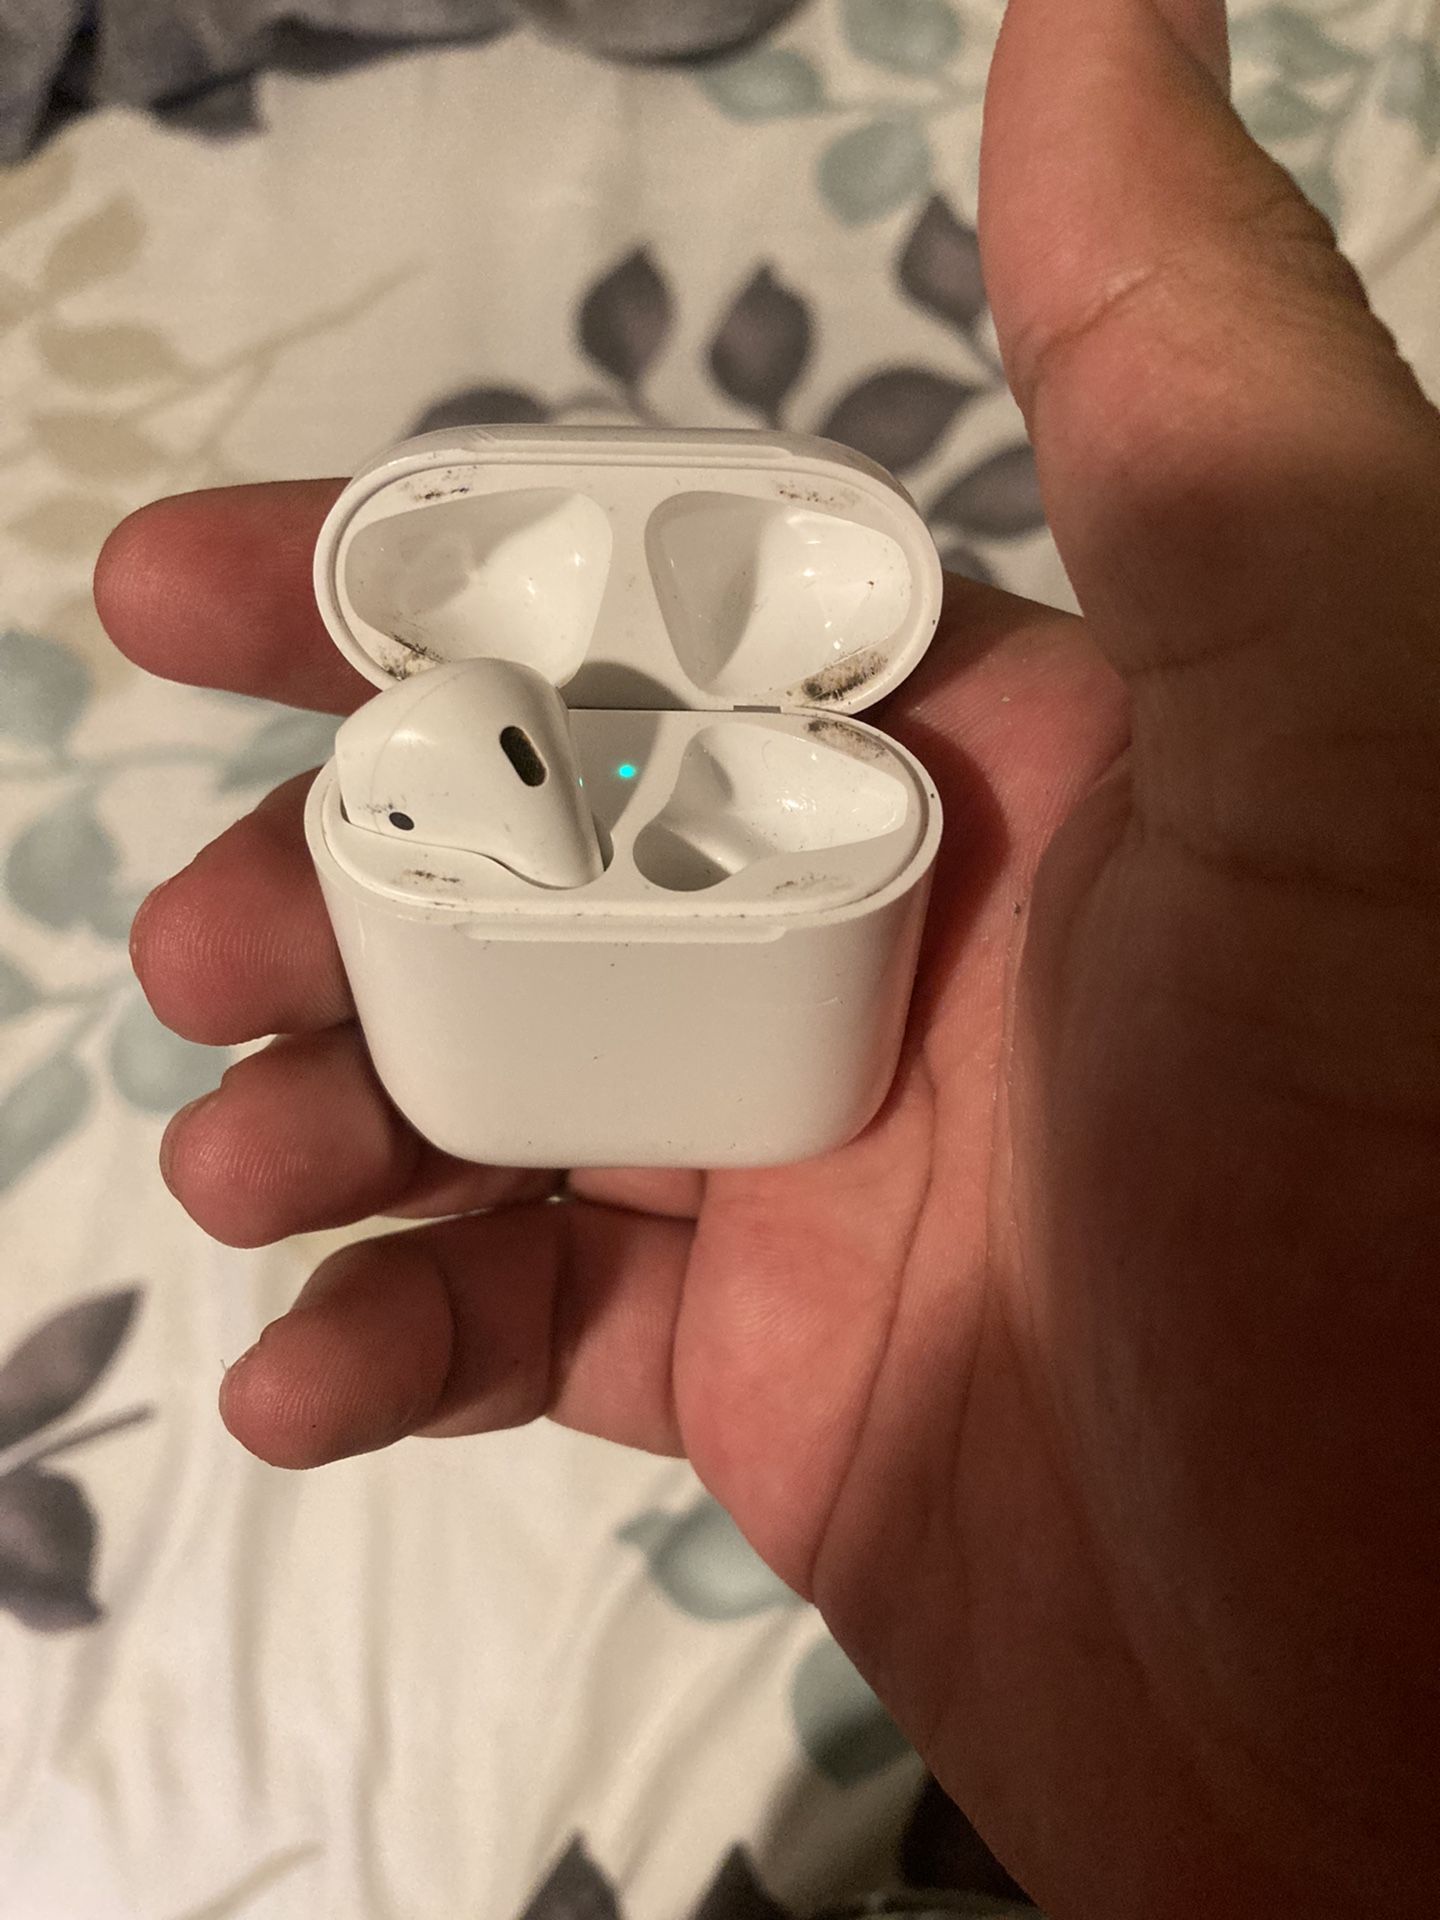 AirPod  Siri’s 2  In Good Condition Lost The Other Side But Still Work With One Side Though 